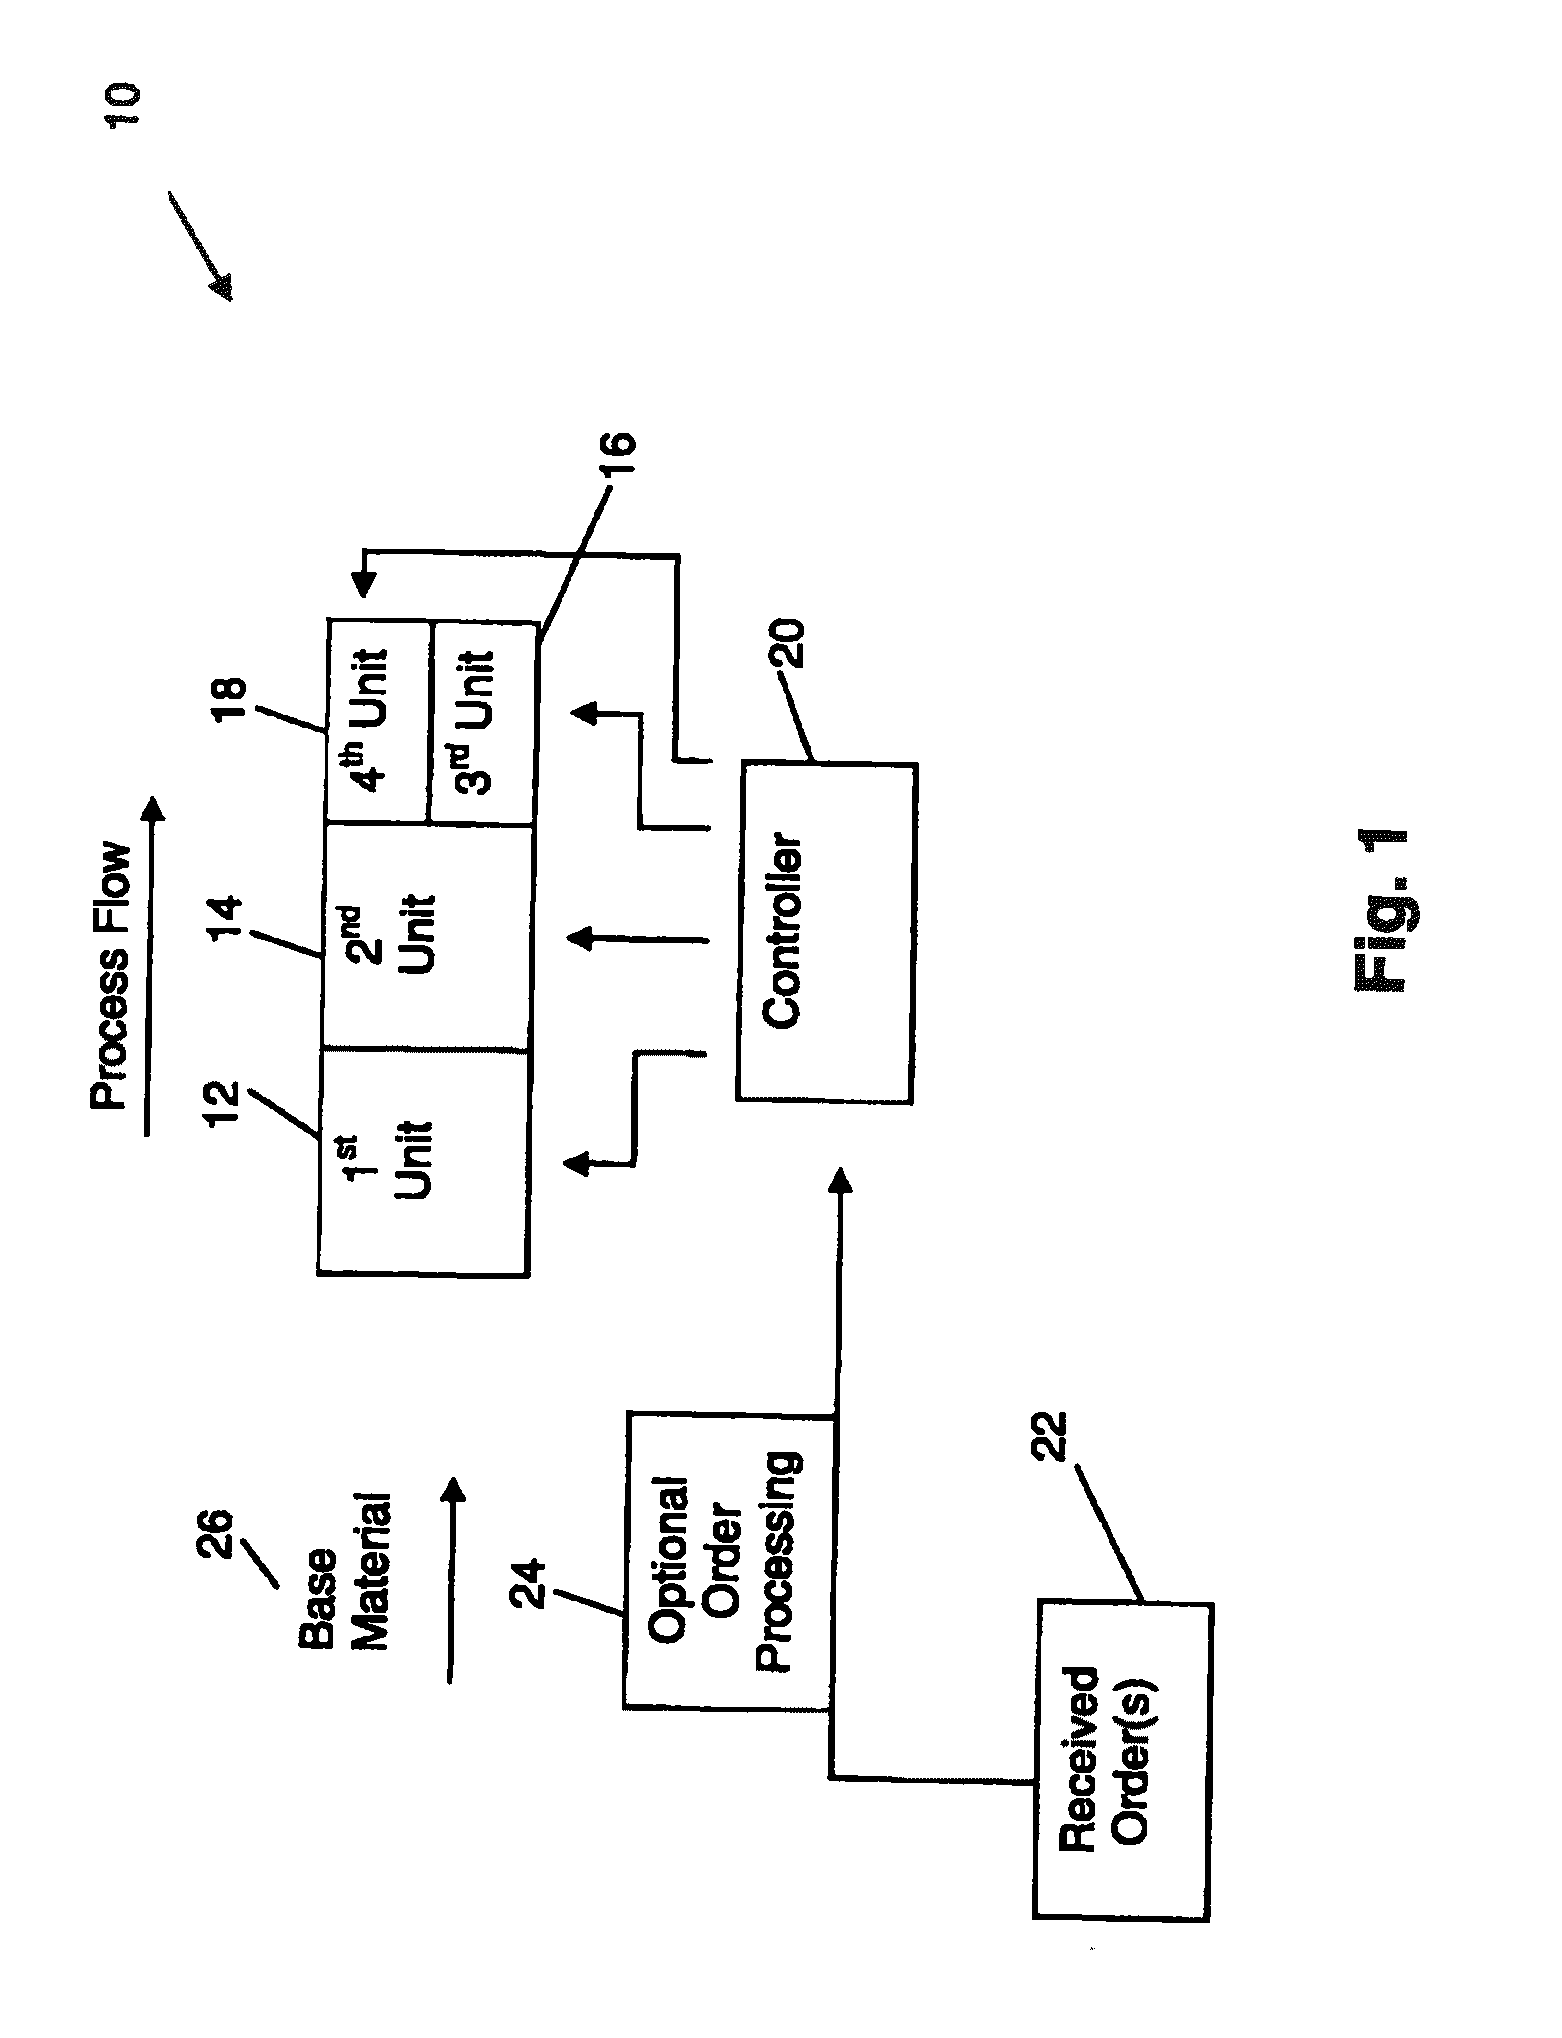 Flexible Manufacturing Systems and Methods